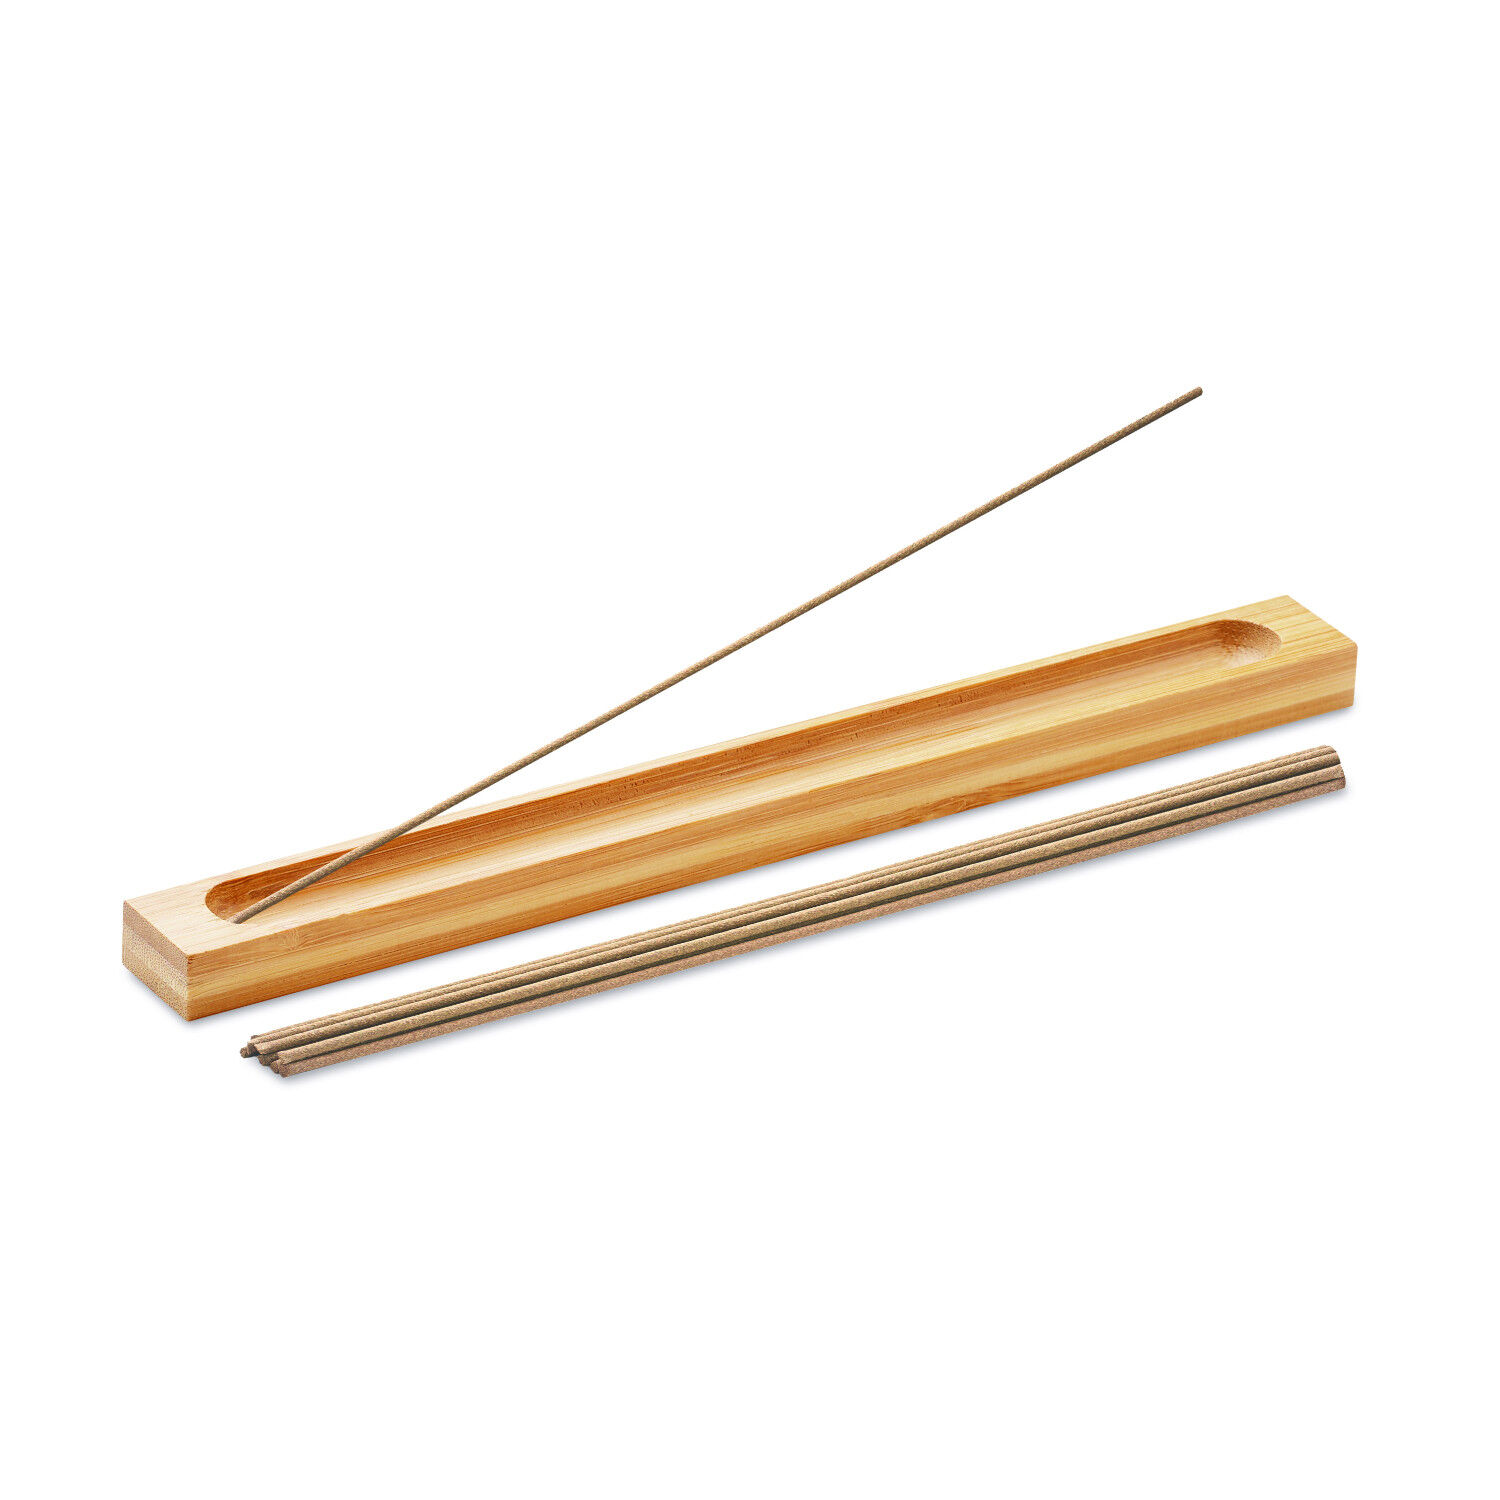 Incense Sticks With Bamboo Holder